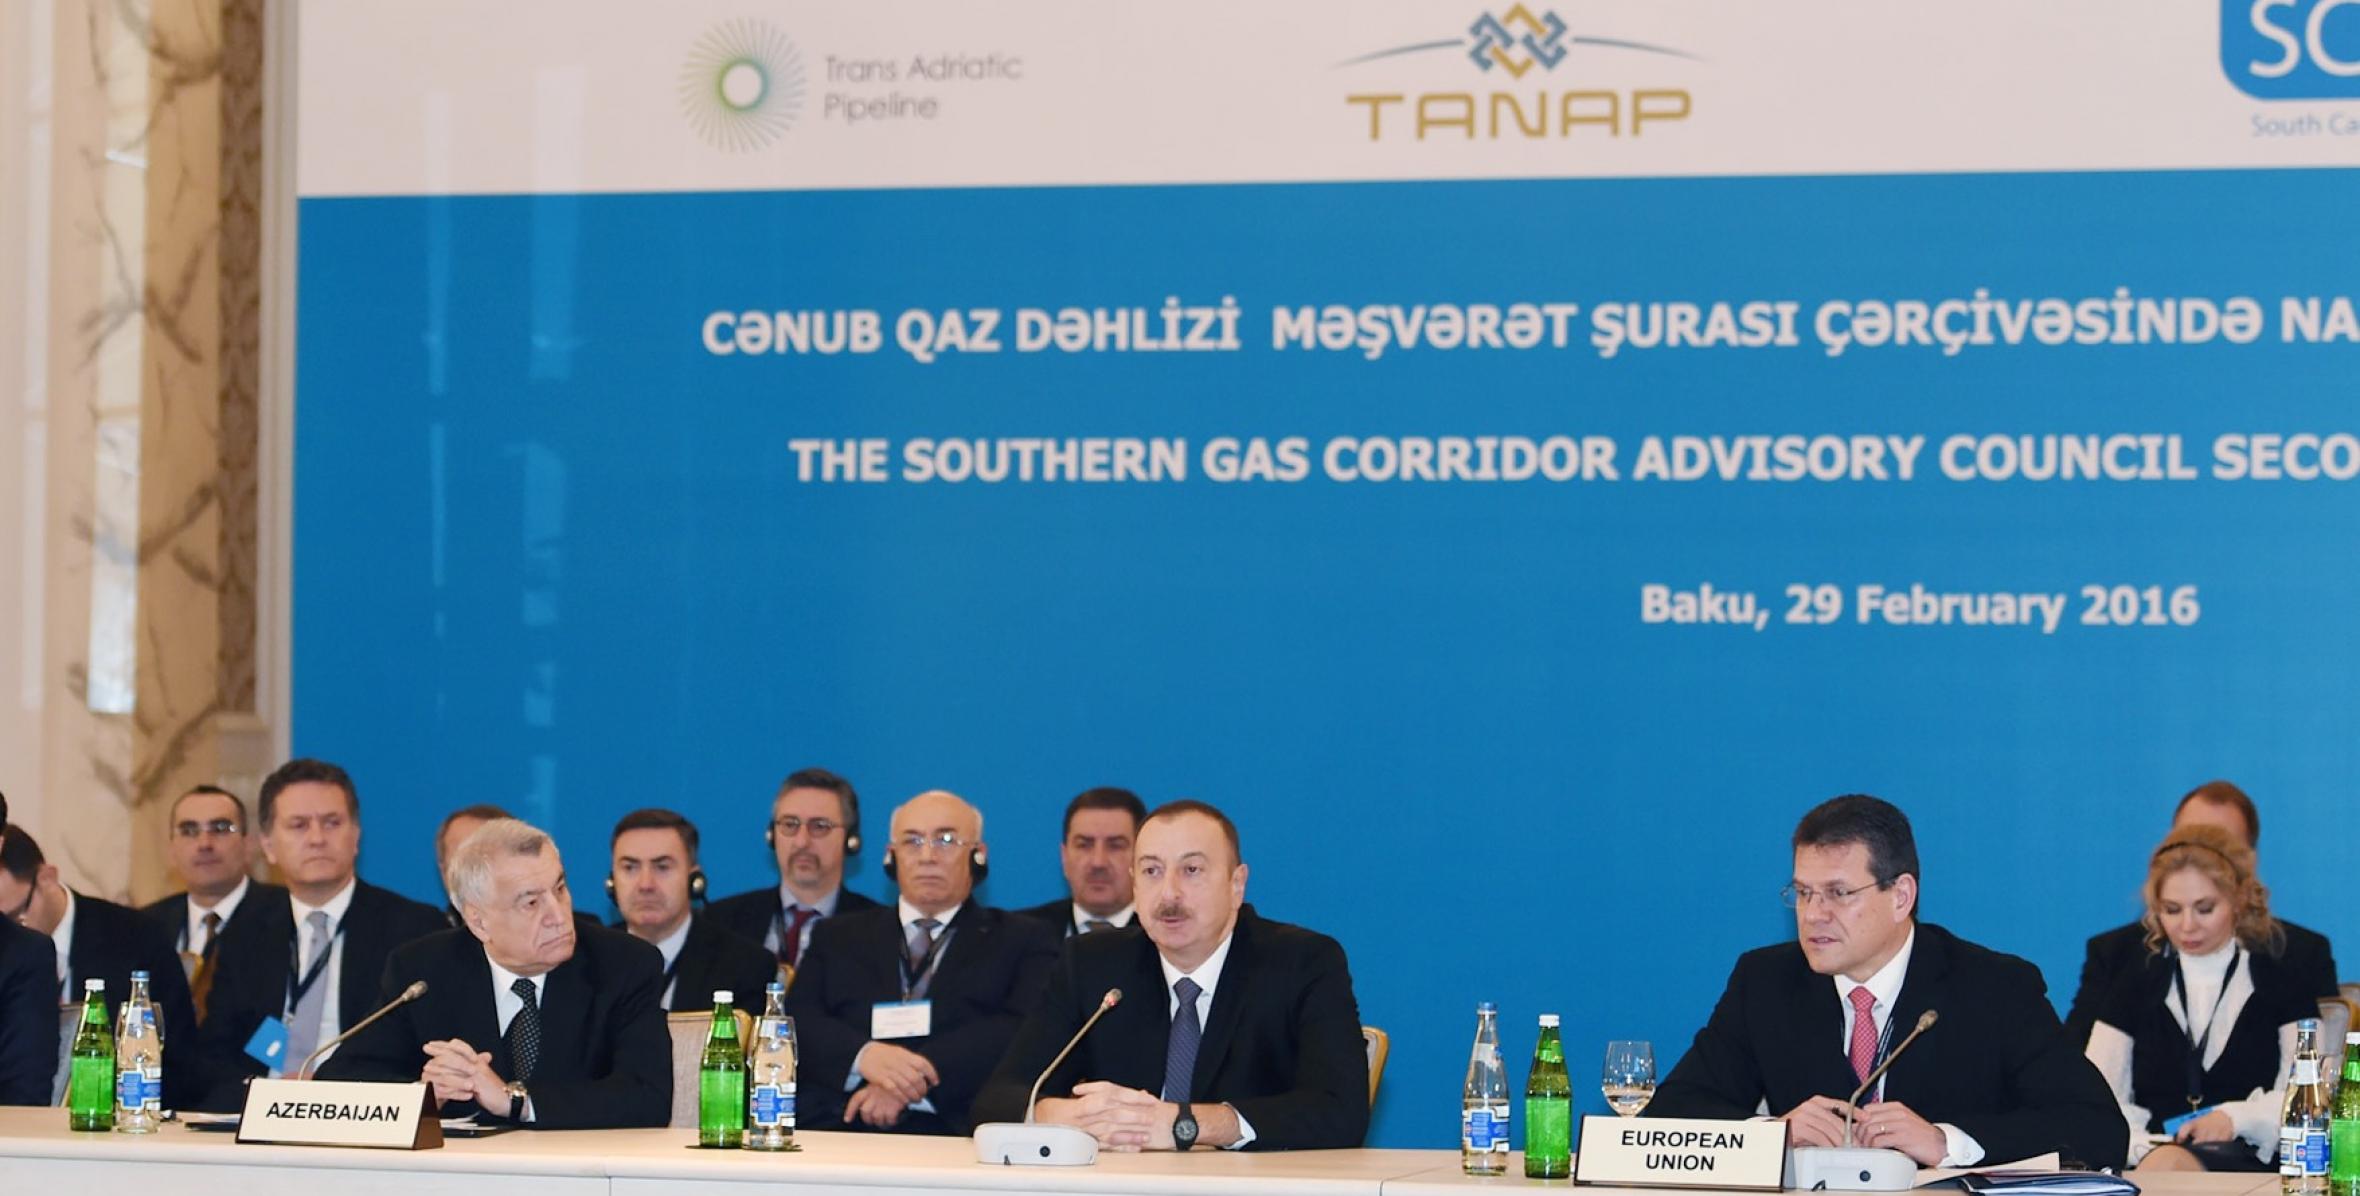 Opening speech by Ilham Aliyev at the second meeting of the Southern Gas Corridor Advisory Council